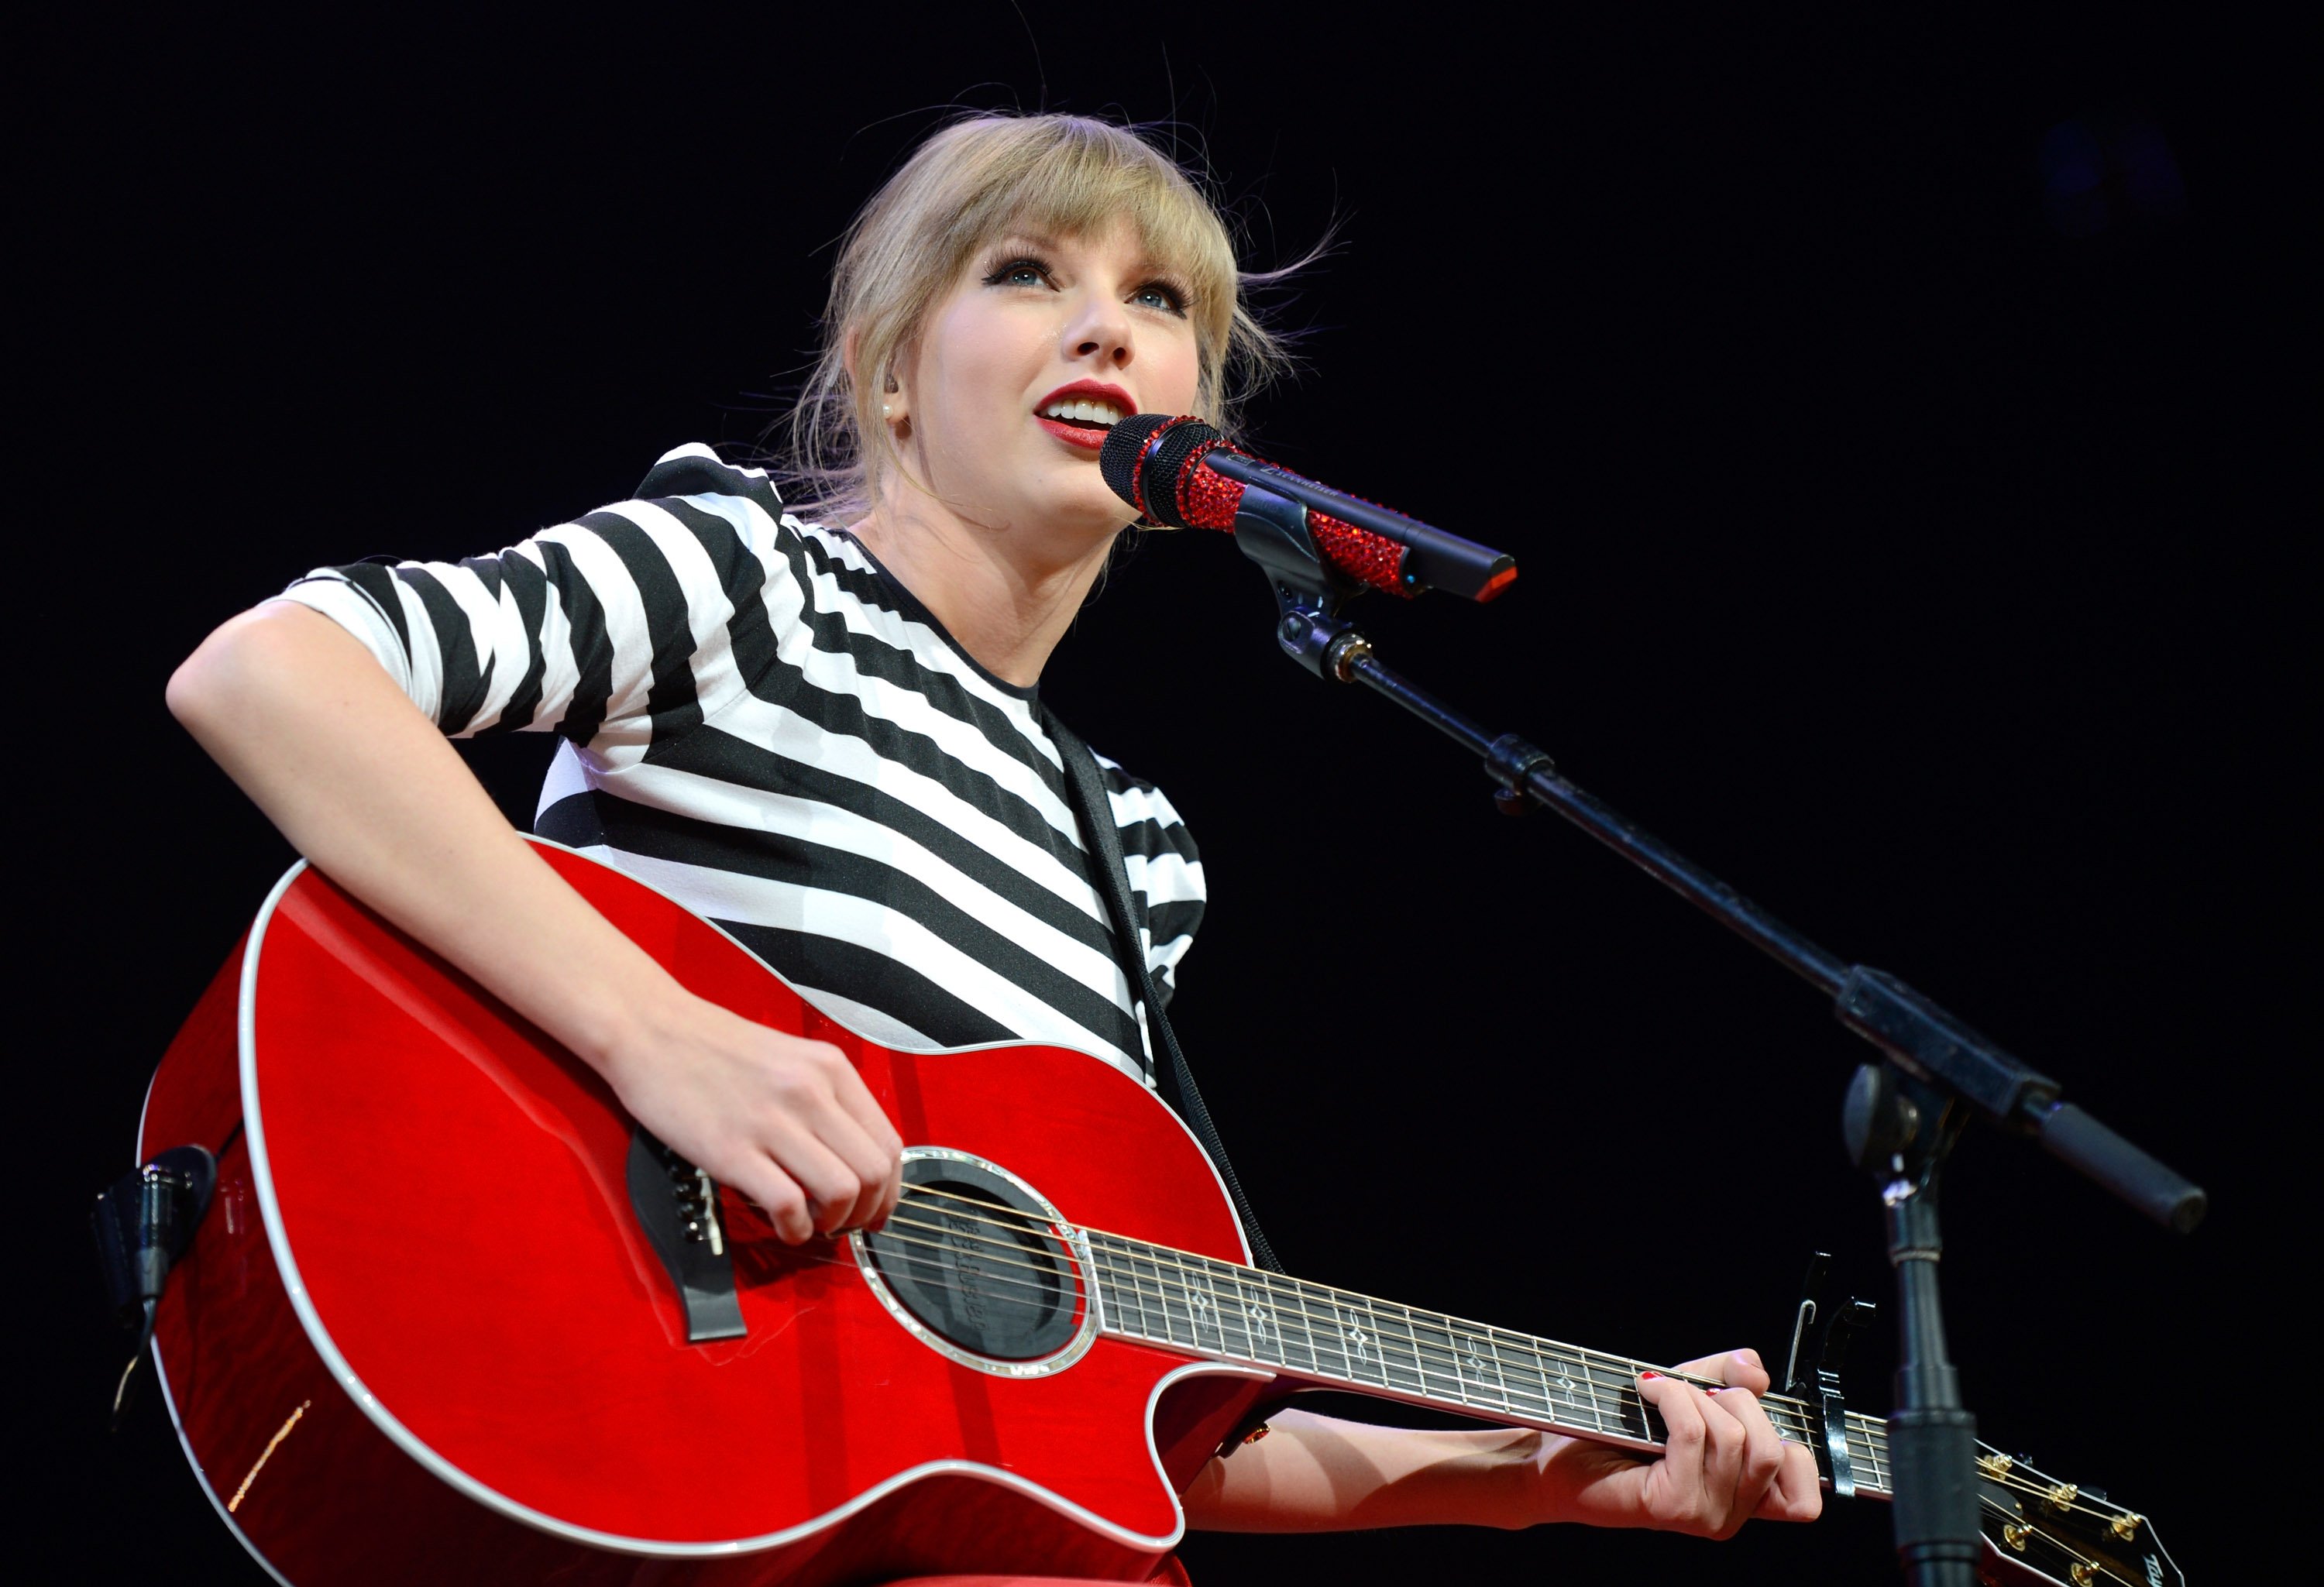 Taylor Swift performs on stage during The RED Tour on March 27, 2013, in Newark, New Jersey.